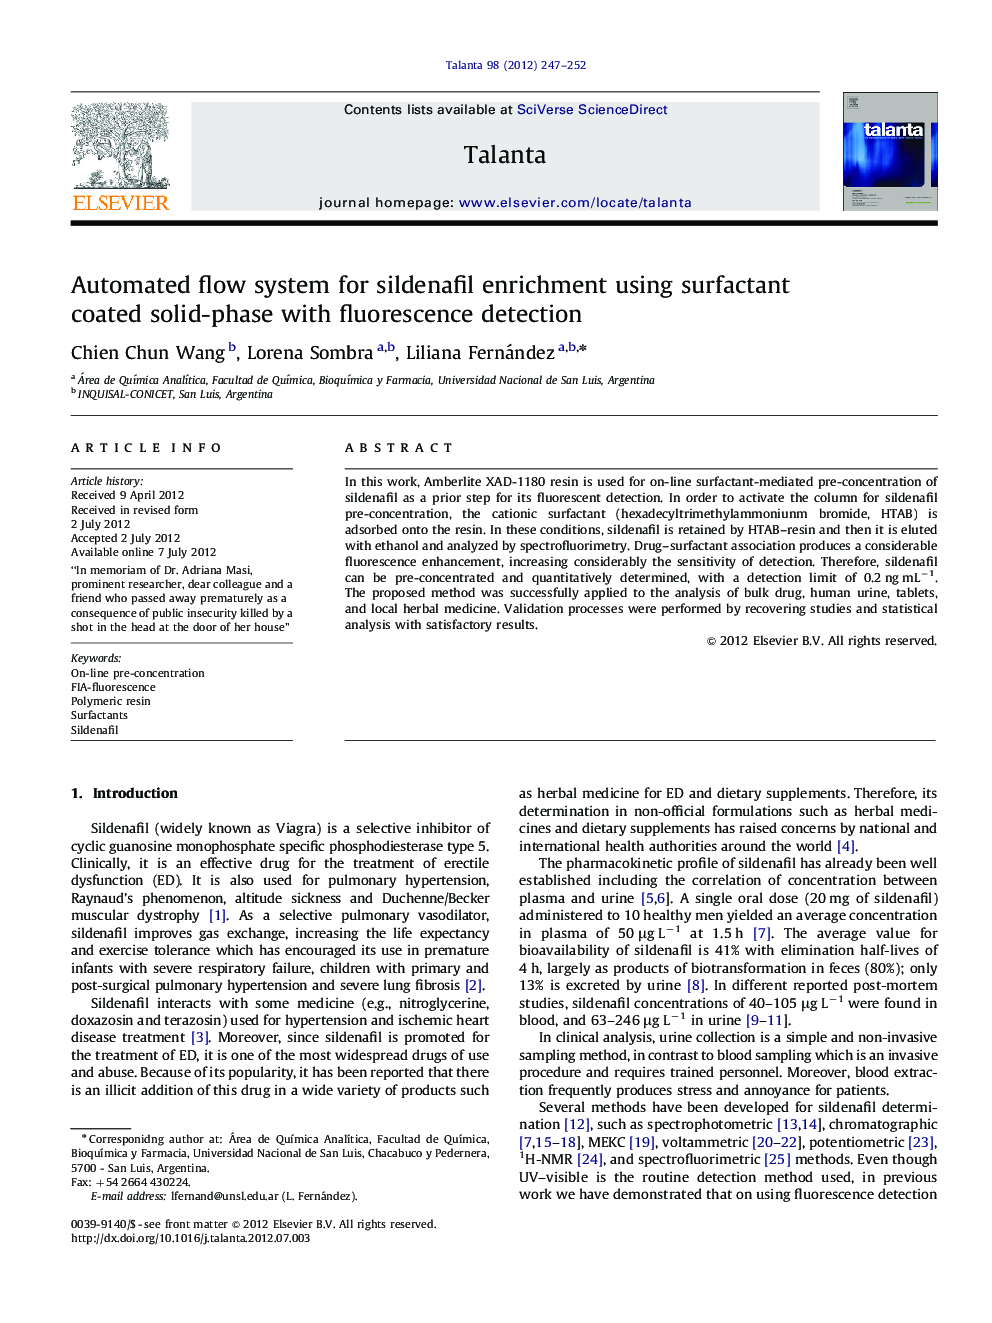 Automated flow system for sildenafil enrichment using surfactant coated solid-phase with fluorescence detection